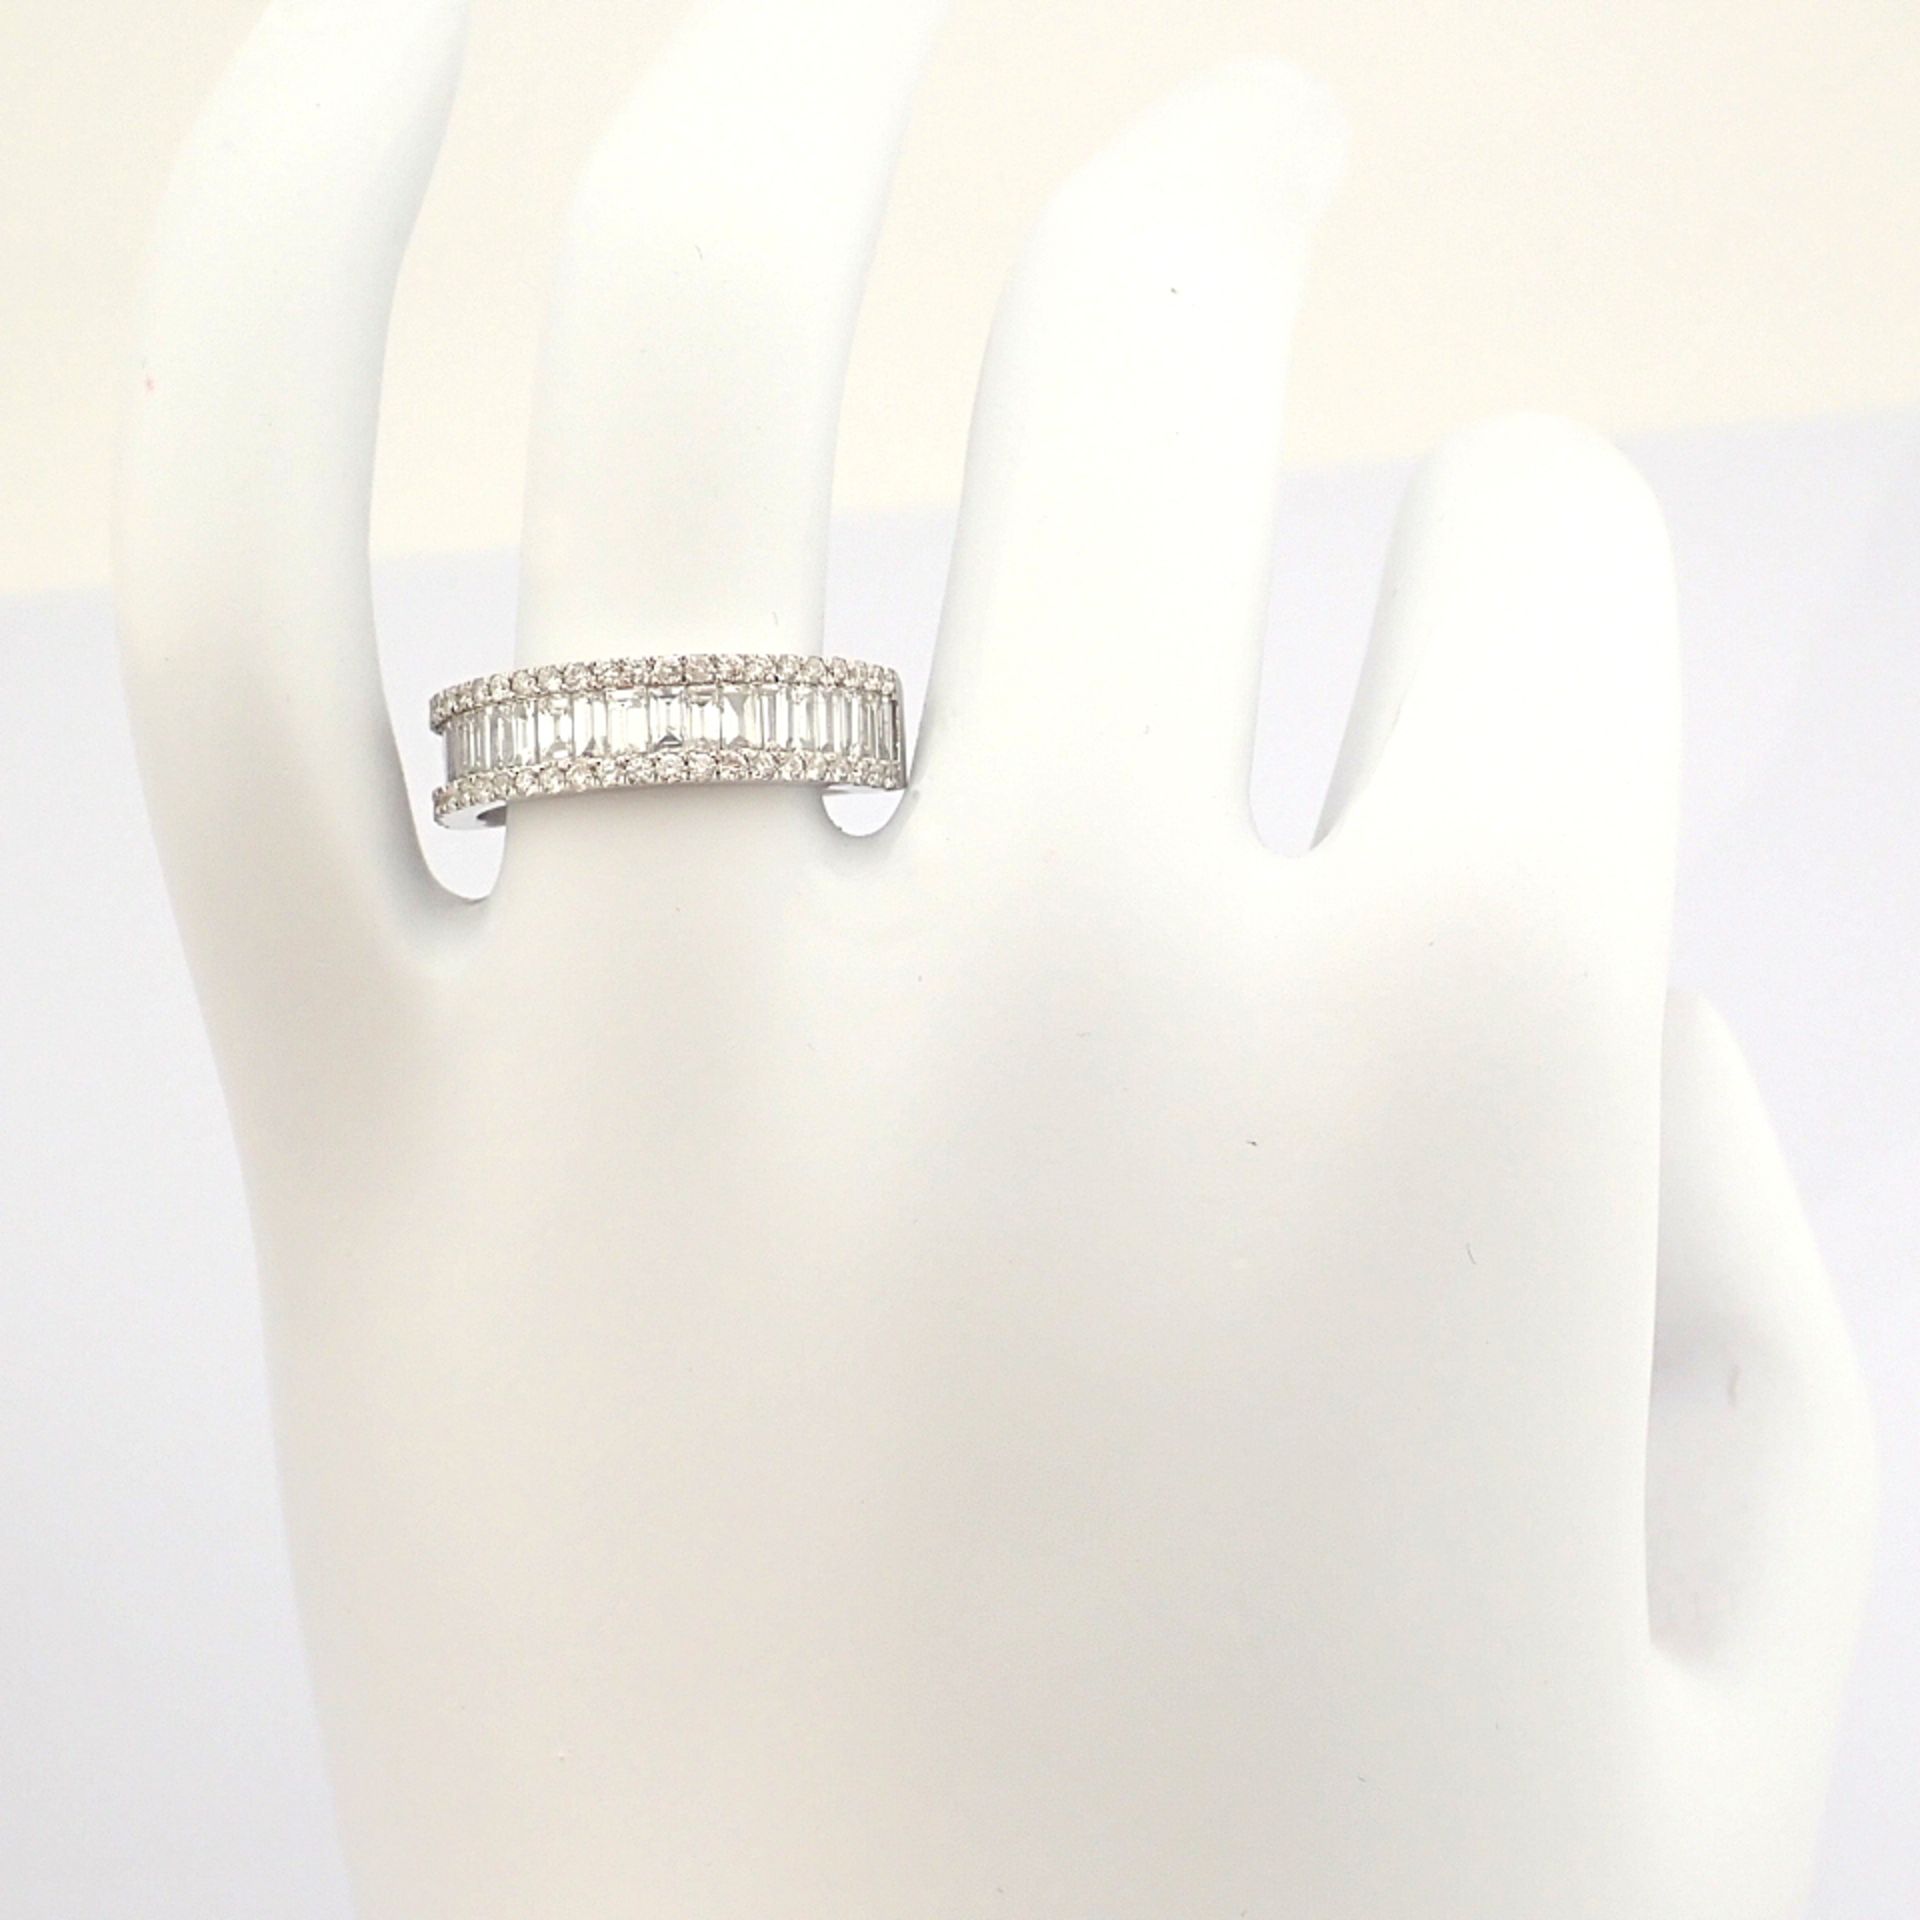 Certificated 14K White Gold Baguette Diamond & Diamond Ring (Total 1.22 ct Stone) - Image 9 of 9